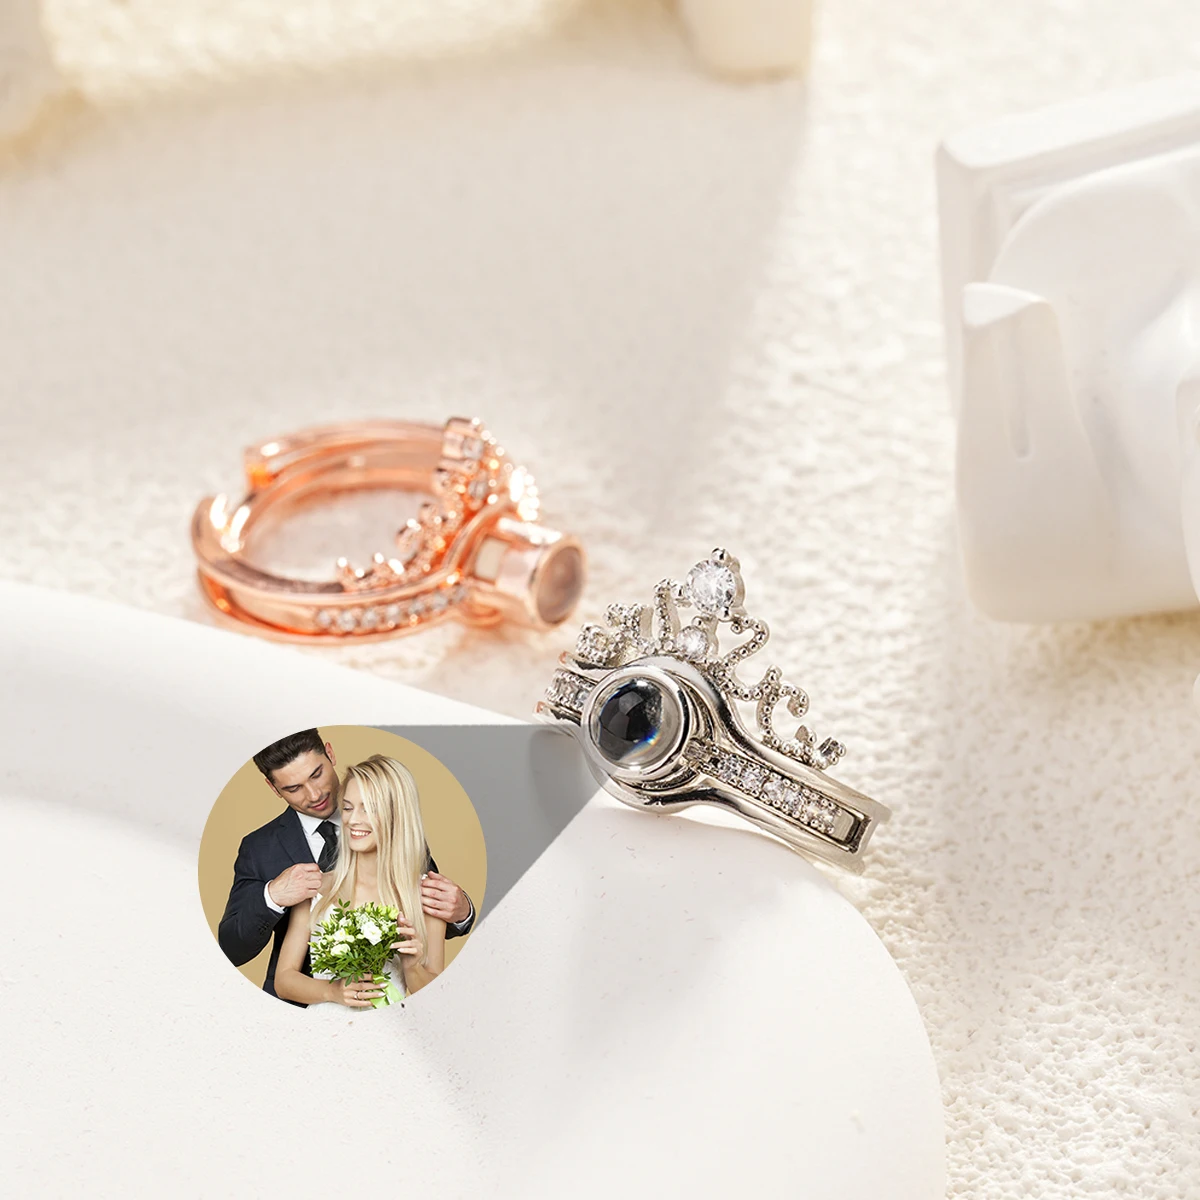 Crystal Crown Photo Custom Image Ring with Your Picture Family Memory Pet Personalized Projection Rings Valentine's Day Gift pesonalized photo ring custom ring with picture inside customized rings gifts for women valentine s day birthday anniversary